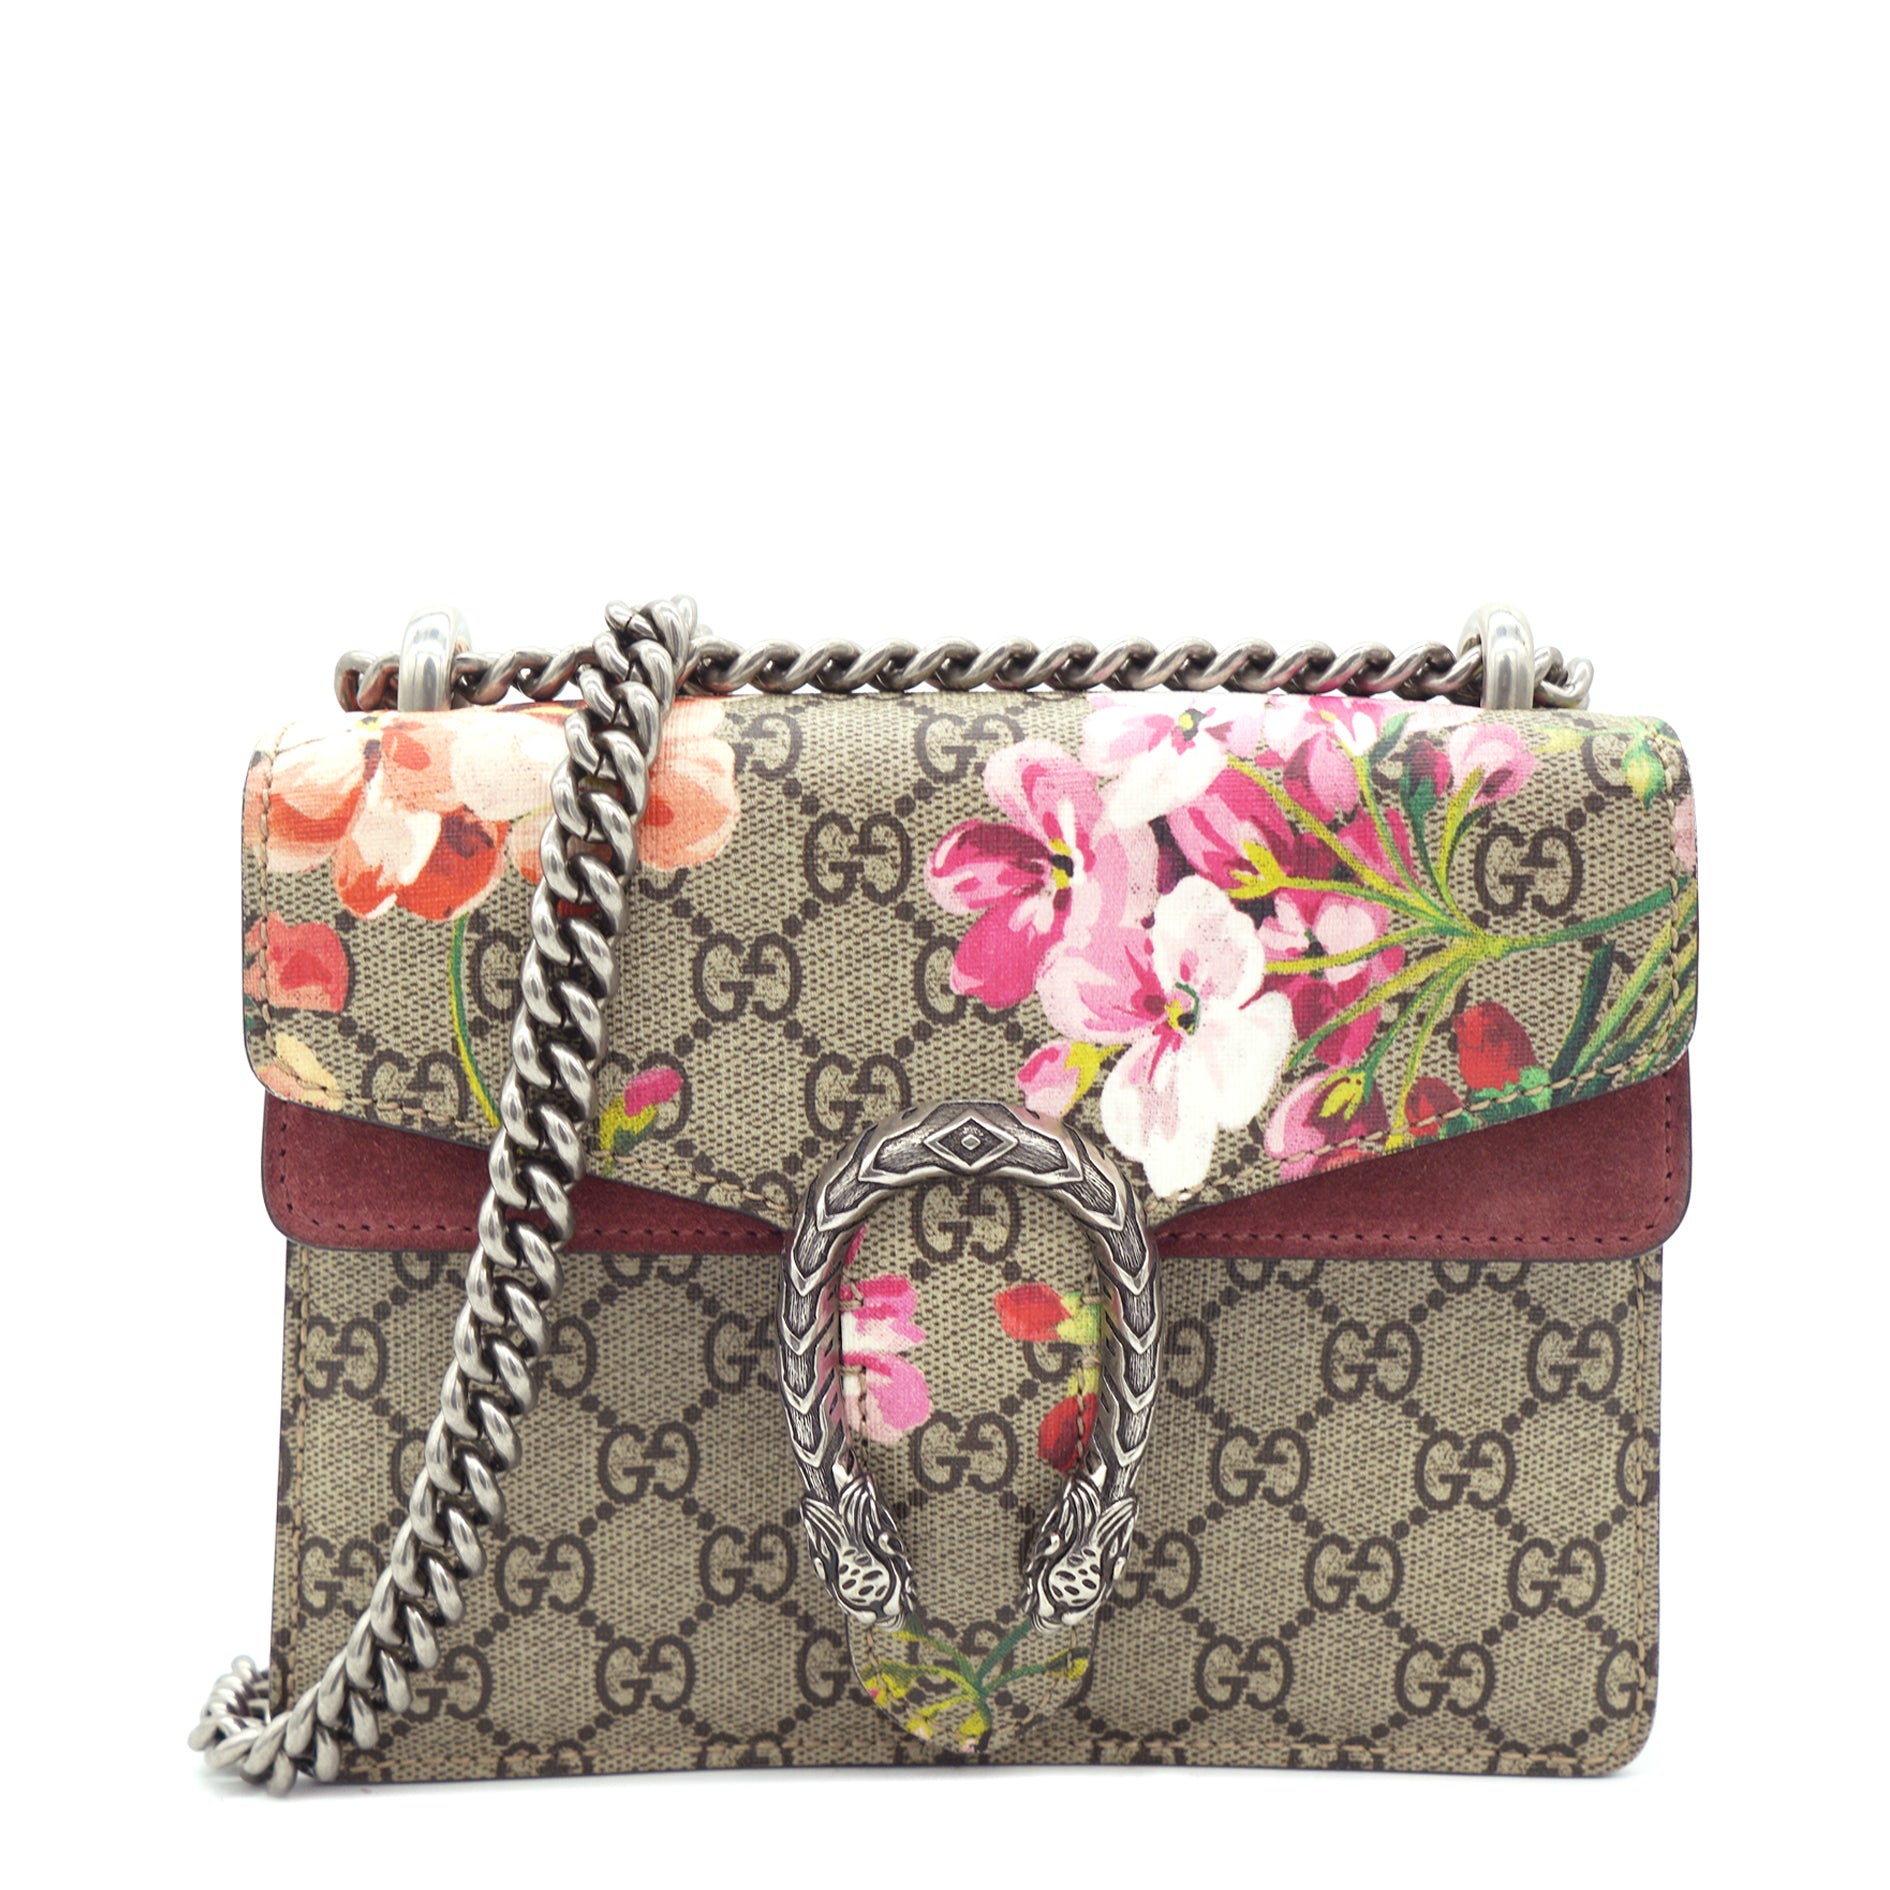 GG Marmont small floral shoulder bag in ivory and pink cotton